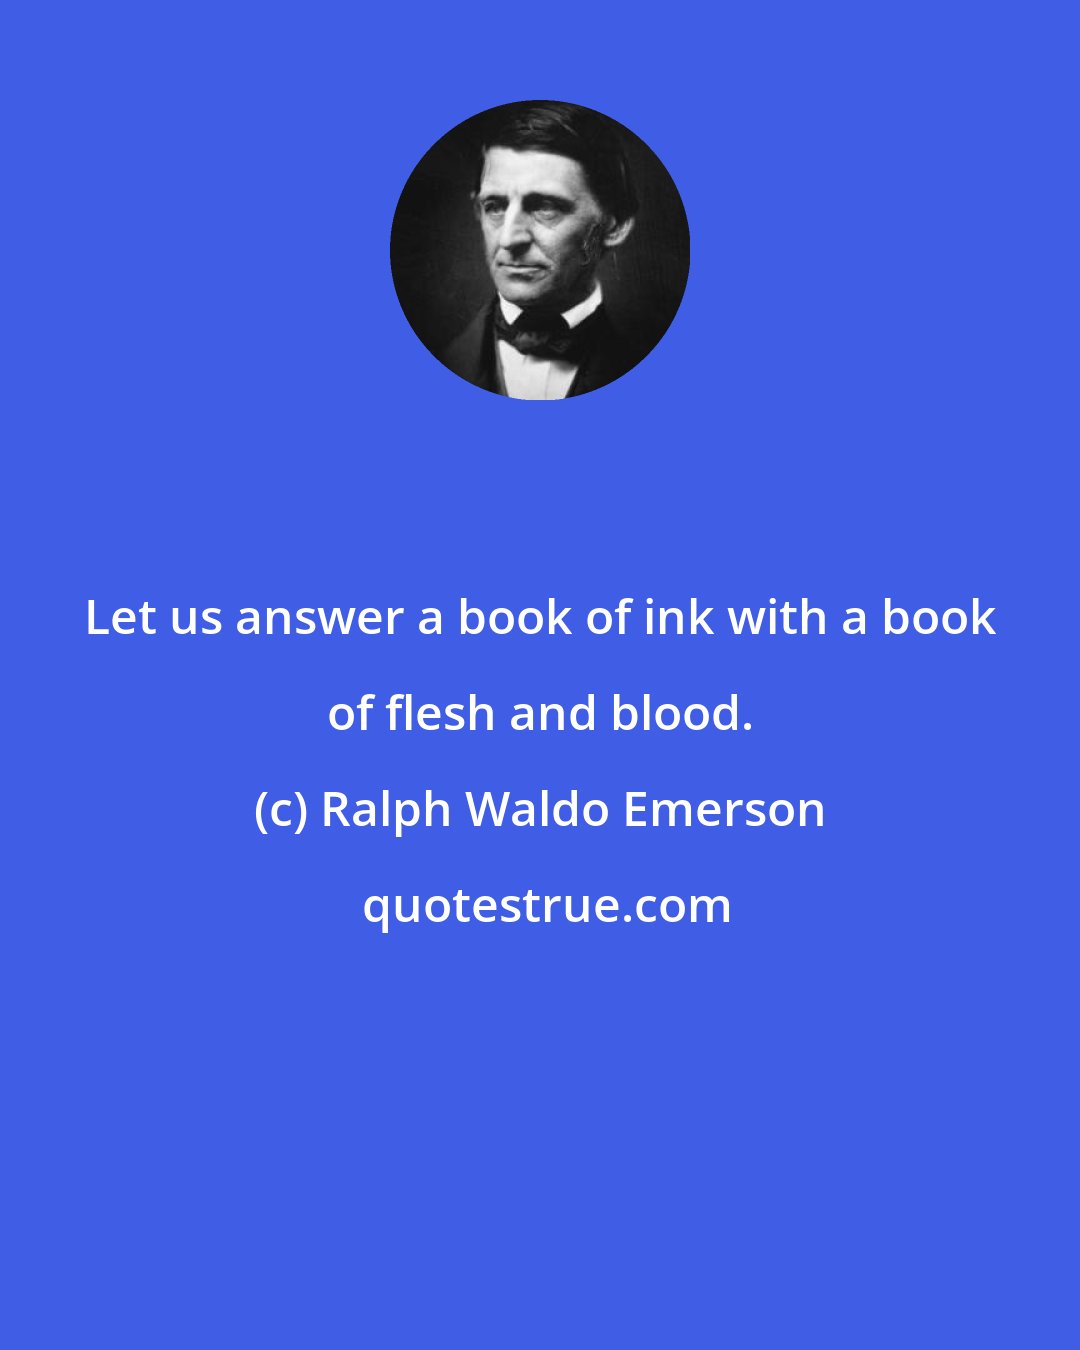 Ralph Waldo Emerson: Let us answer a book of ink with a book of flesh and blood.